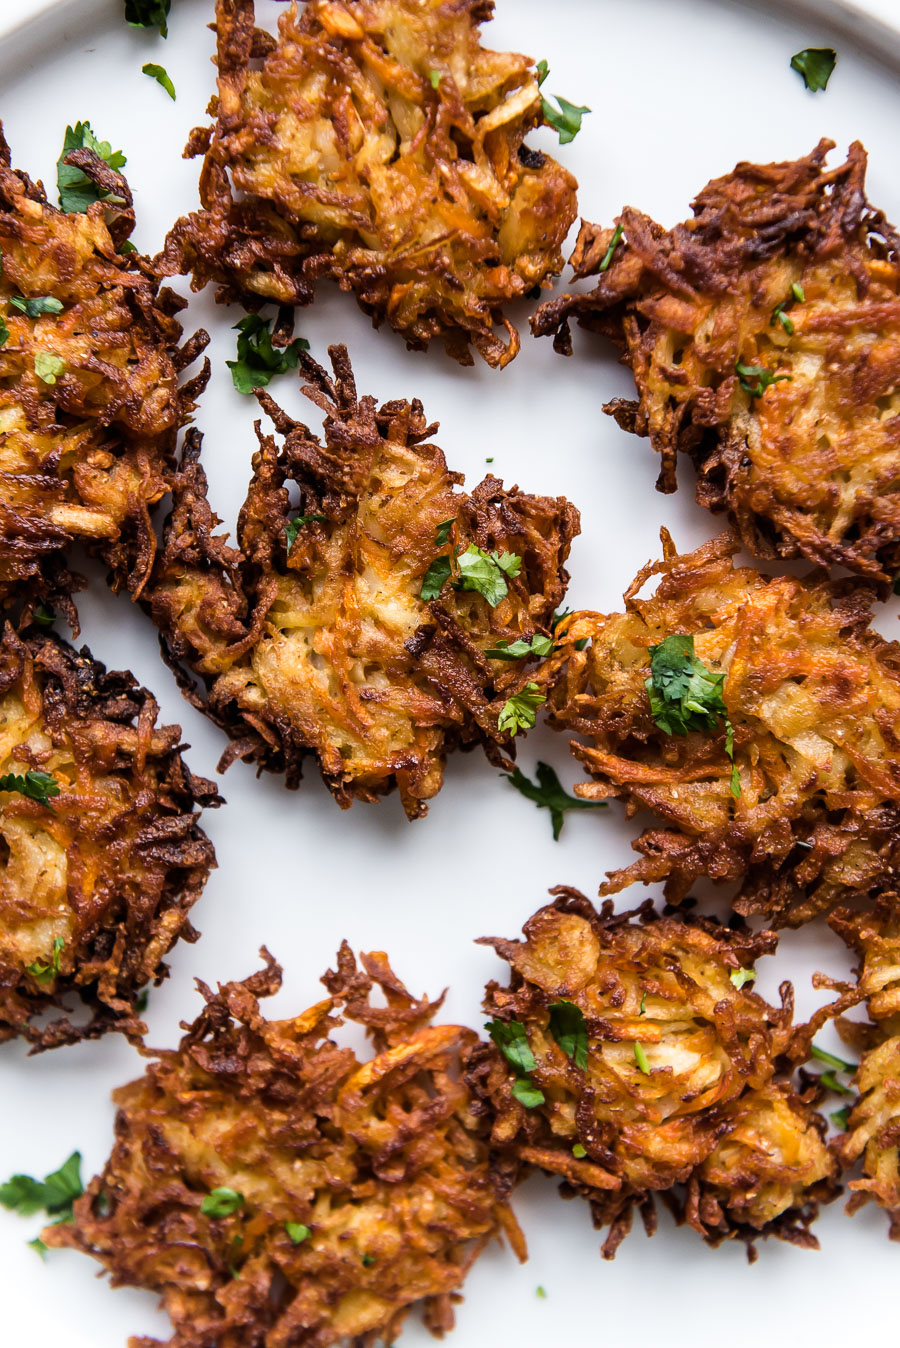 Carrot Latkes with Fried Eggplant and Harissa Tahini Drizzle - Gather A Table